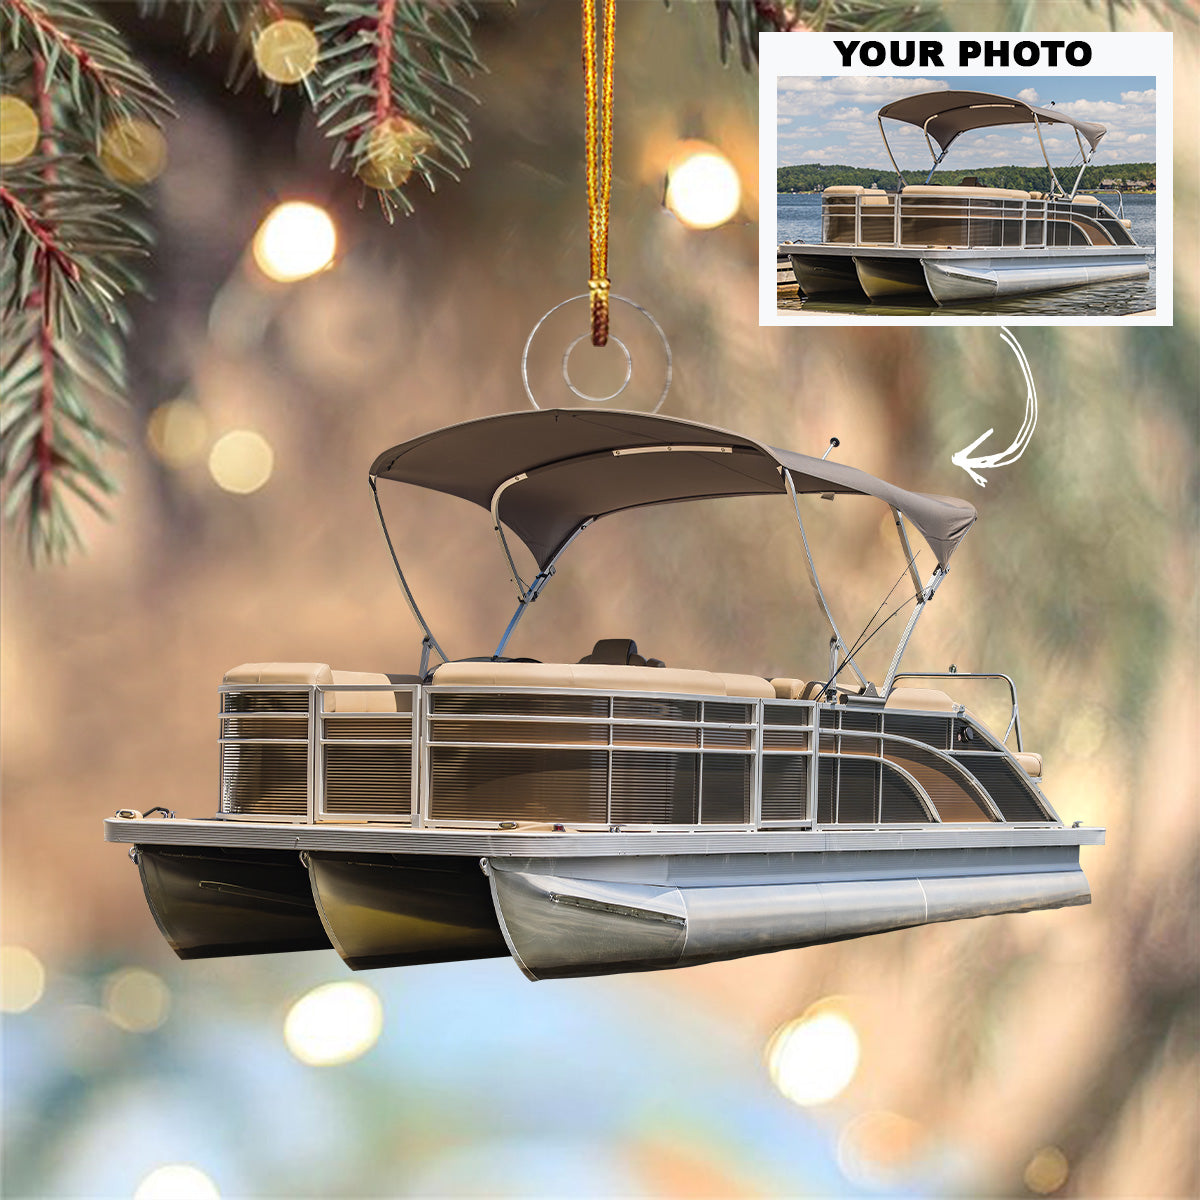 I Love Pontoon - Personalized Custom Photo Mica Ornament - Christmas Gift For Pontoon Lovers, Family Members